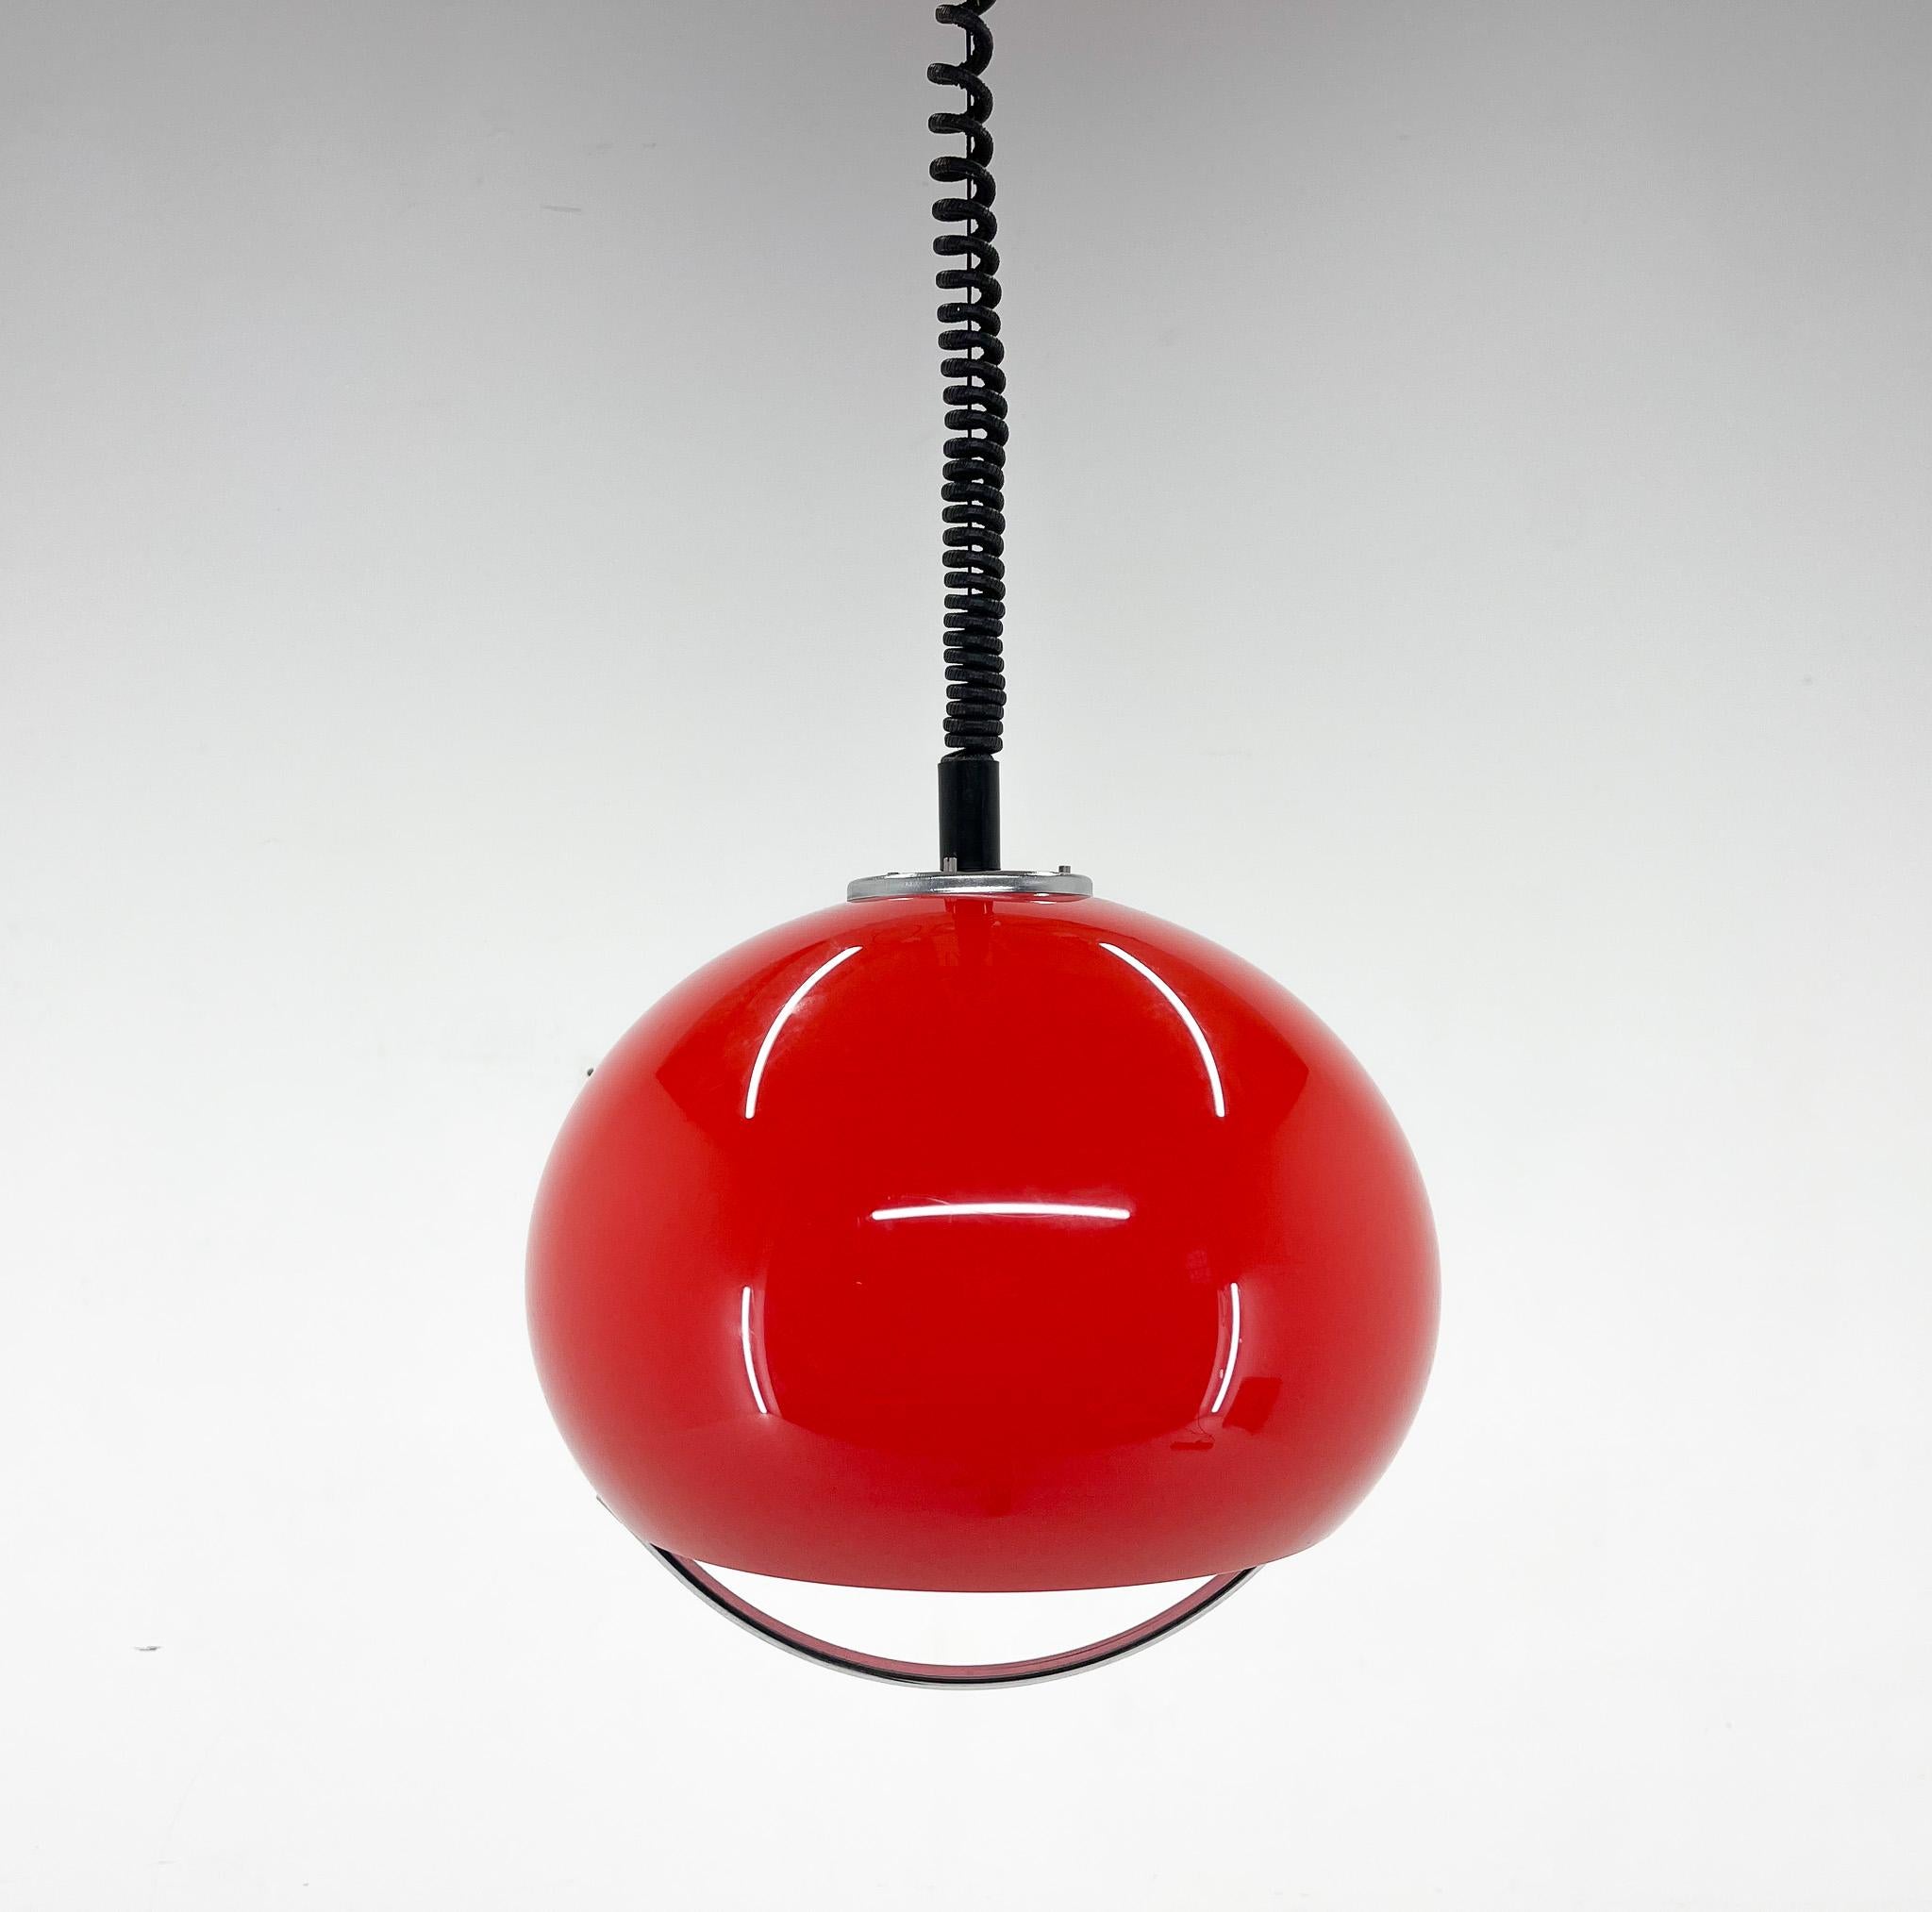 Mid-Century Modern Midcentury Red Pendant with Chrome by Harvey Guzzini for Meblo, Italy For Sale